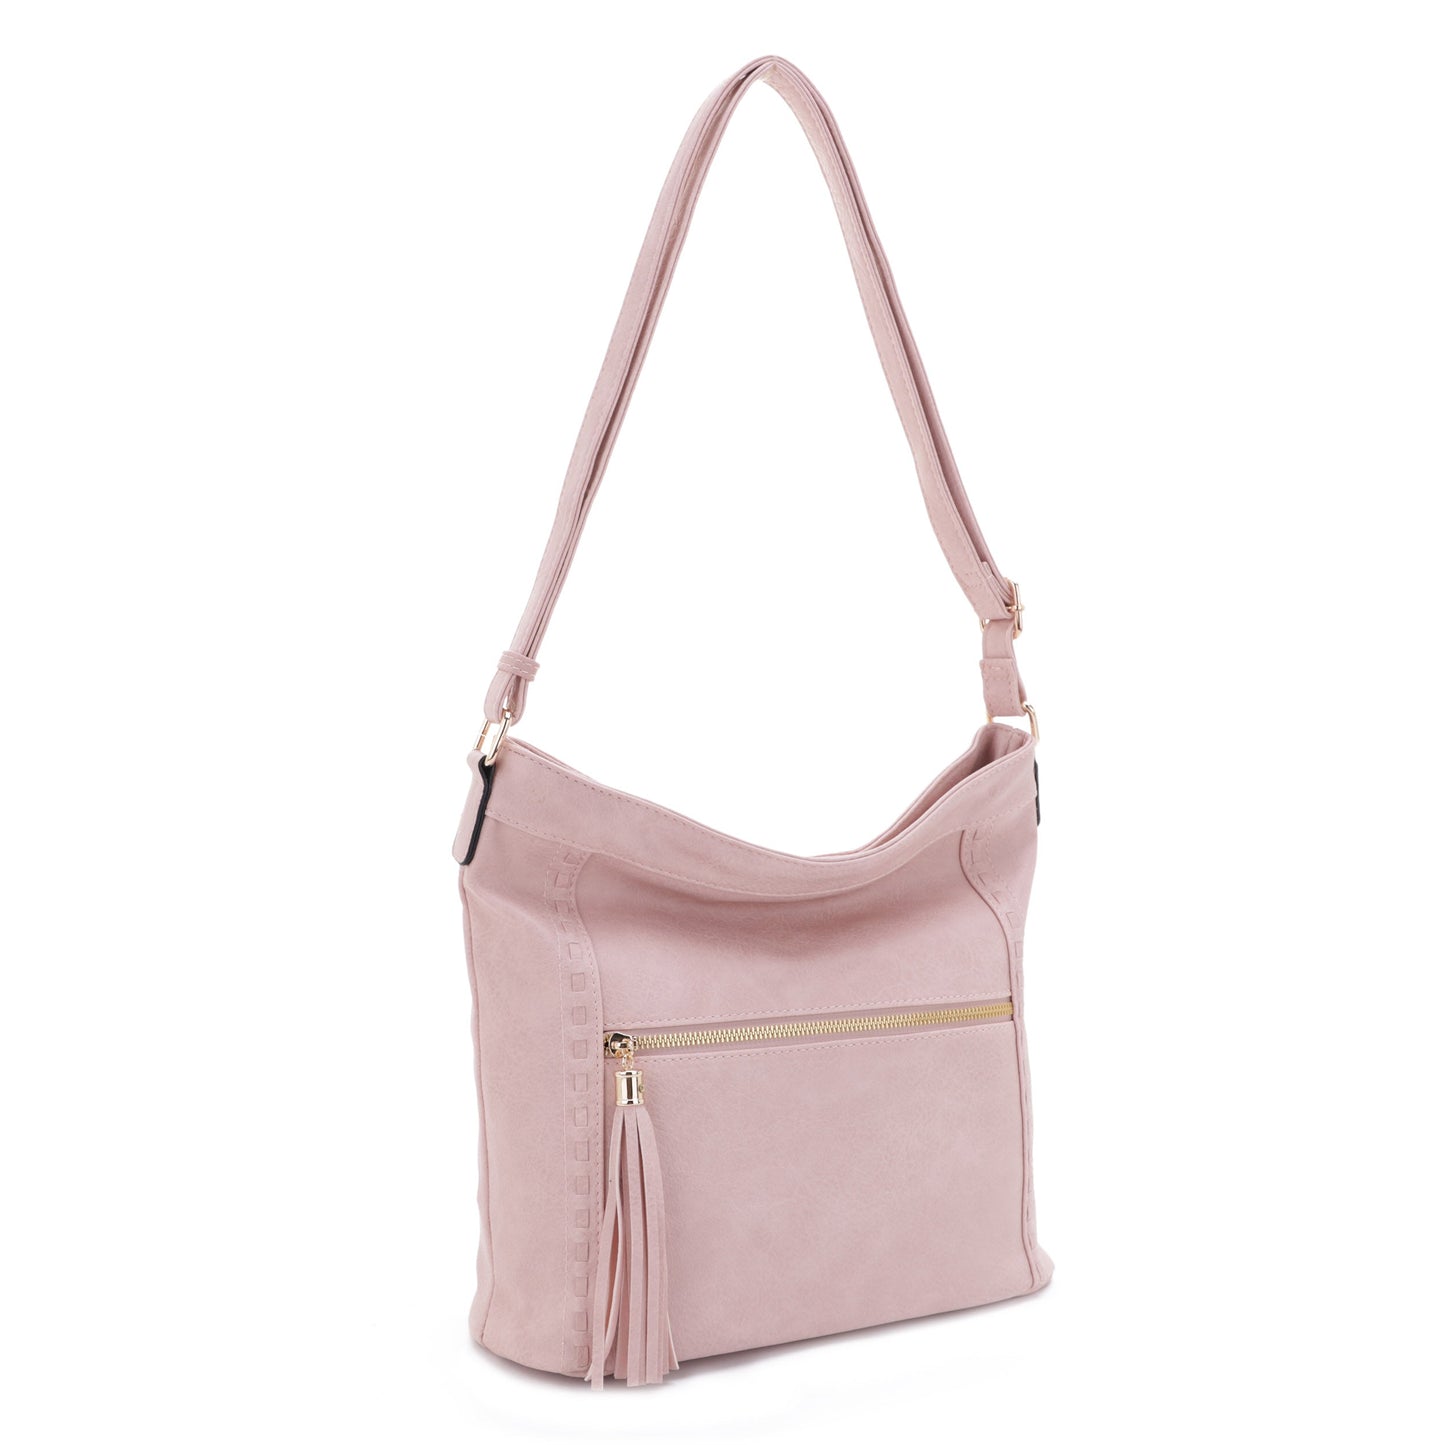 Whipstitch Accent with Tassel Hobo Bag